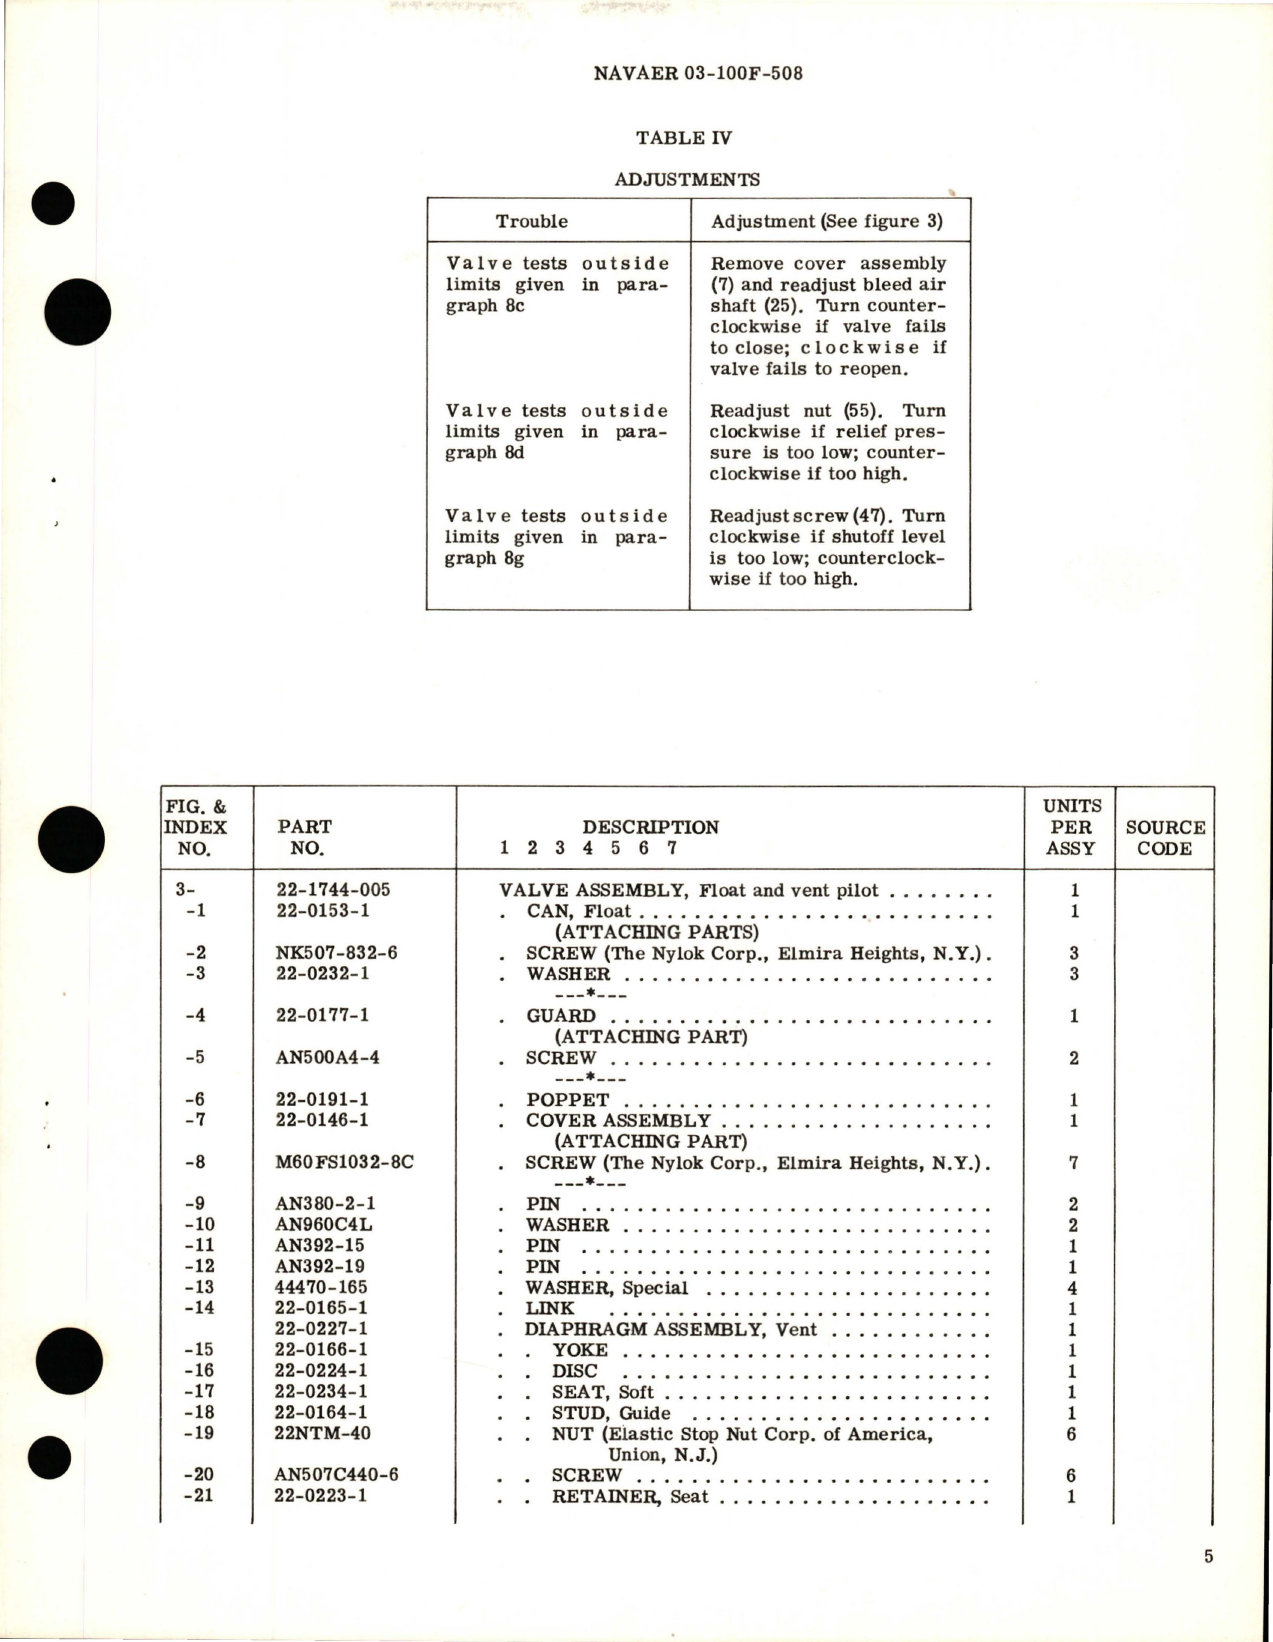 Sample page 5 from AirCorps Library document: Overhaul Instructions with Parts Breakdown for Float and Vent Pilot Valve - Parts 22-1744-004, 22-1744-0041, and 22-1744-005